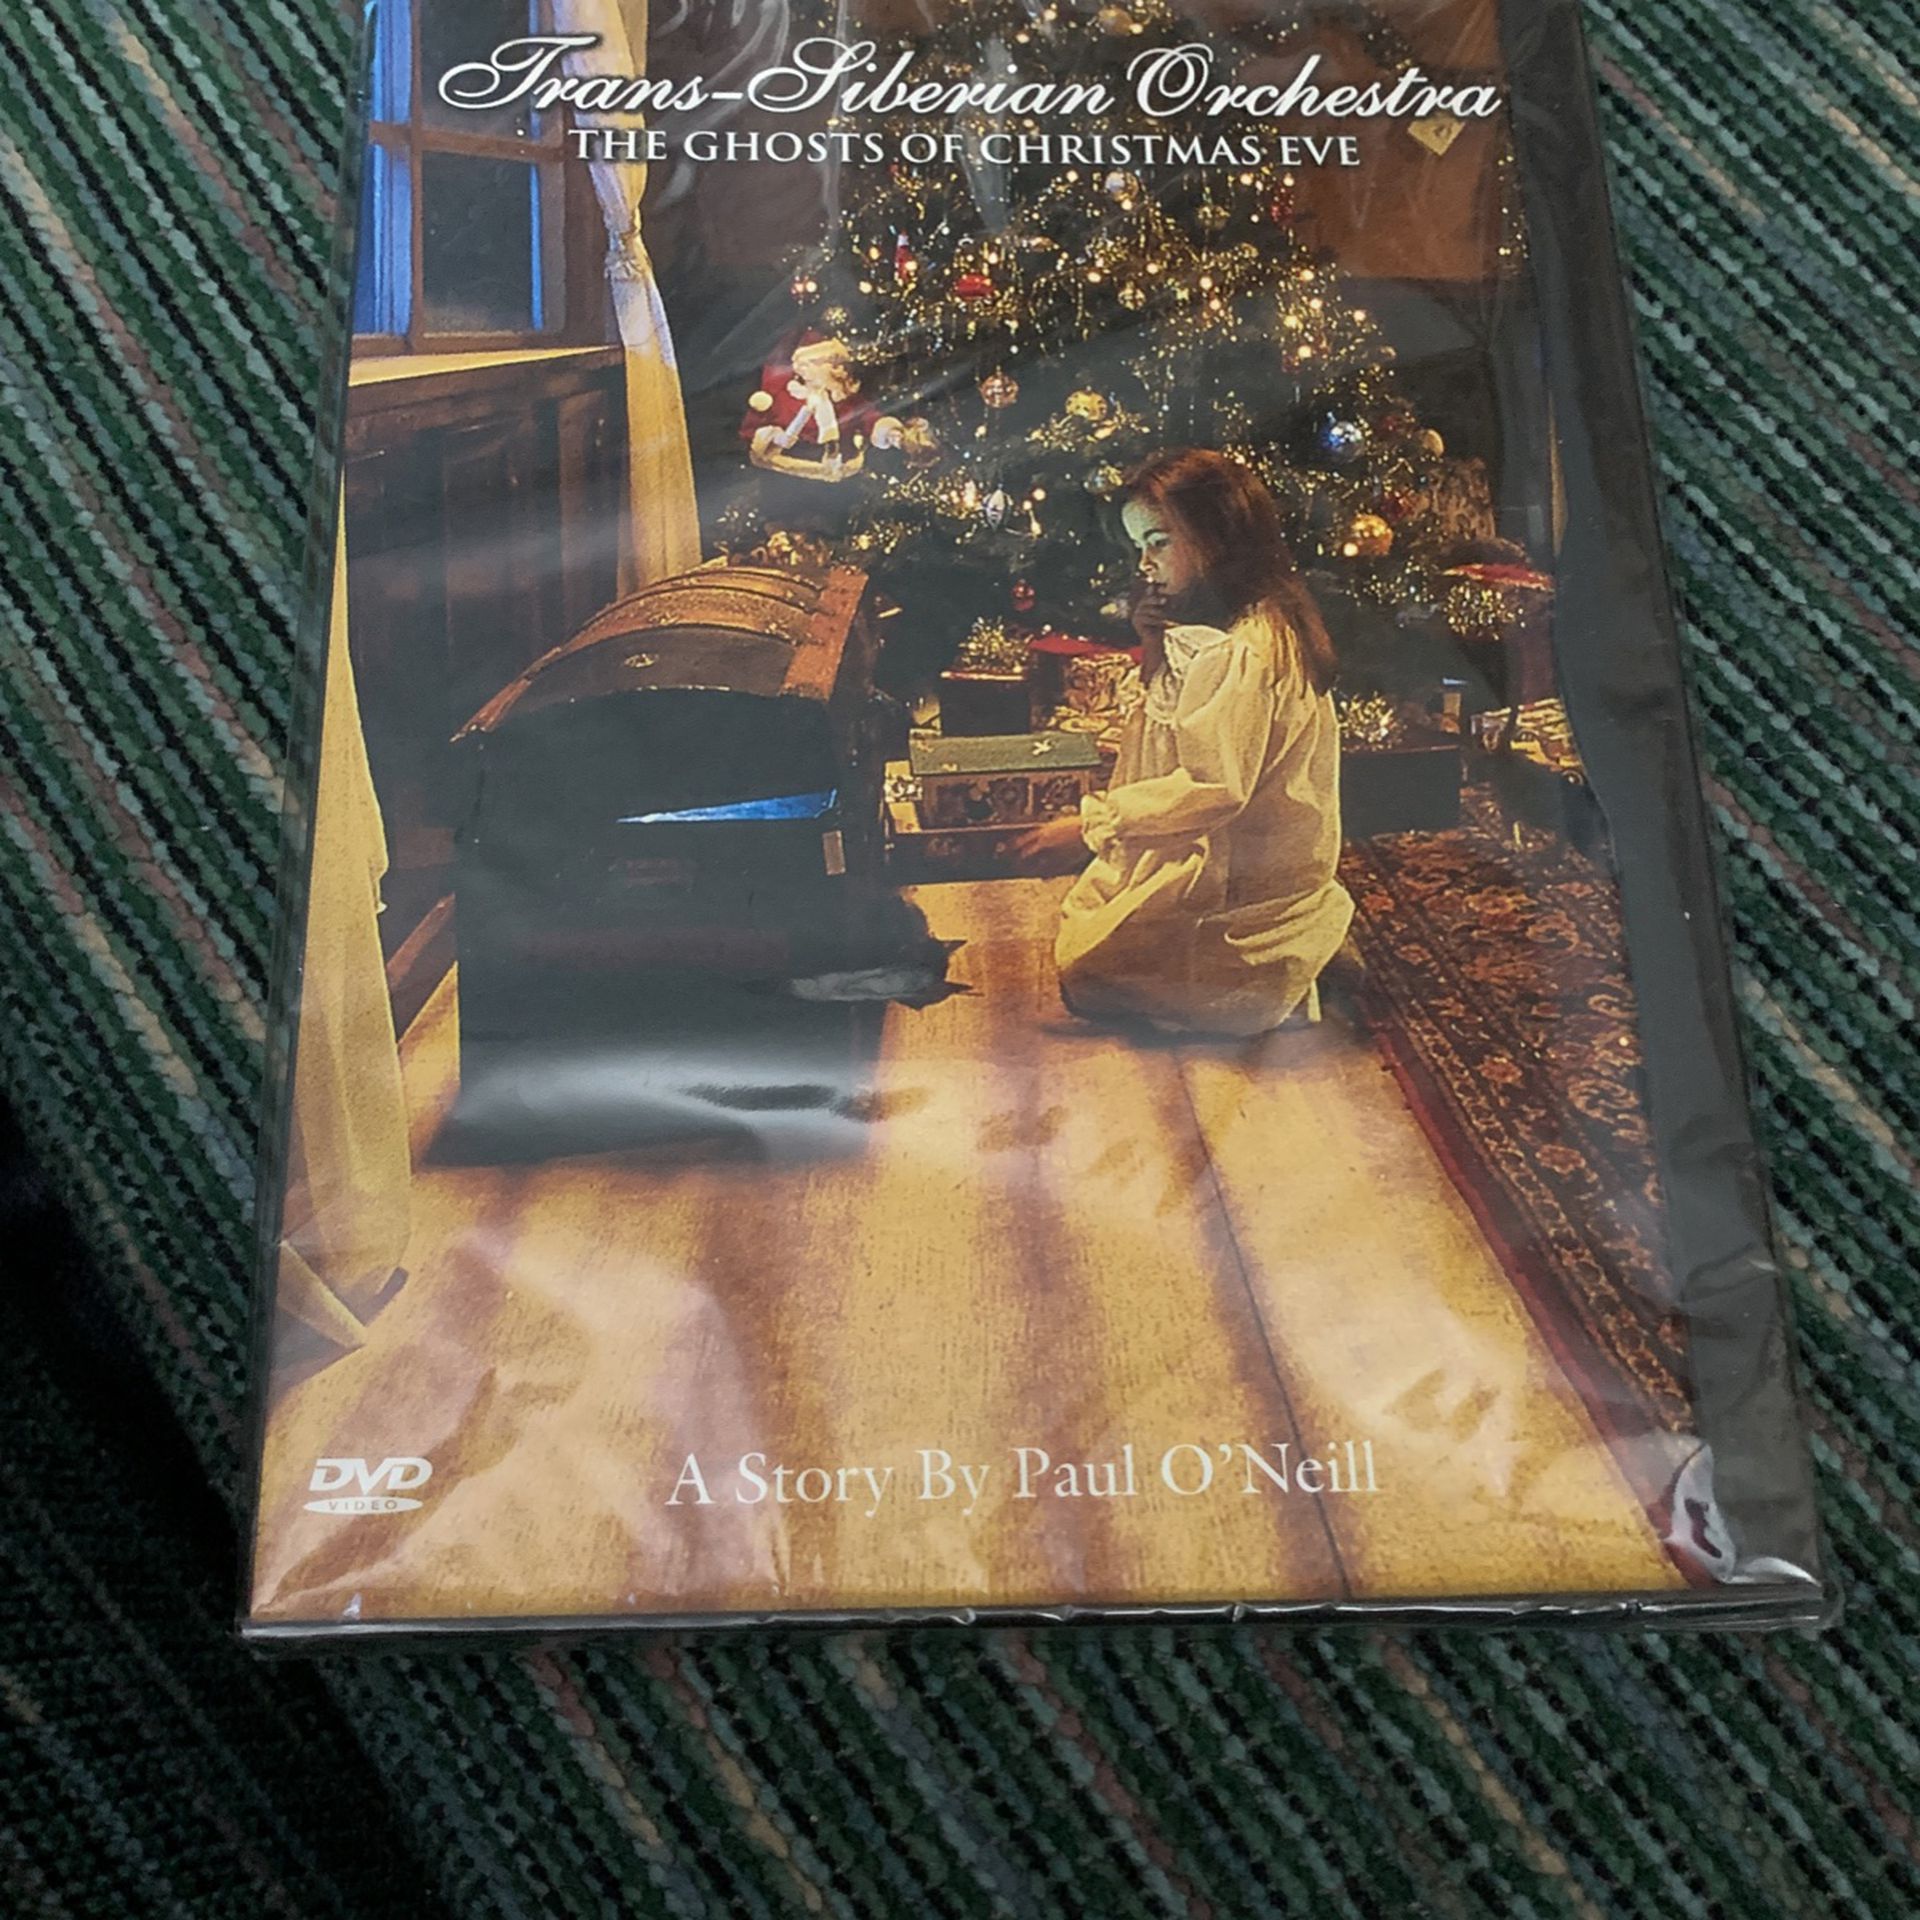 Trans-Siberian Orchestra DVD “The Ghosts Of Christmas Eve” (brand new, still in shrink-wrap!!)